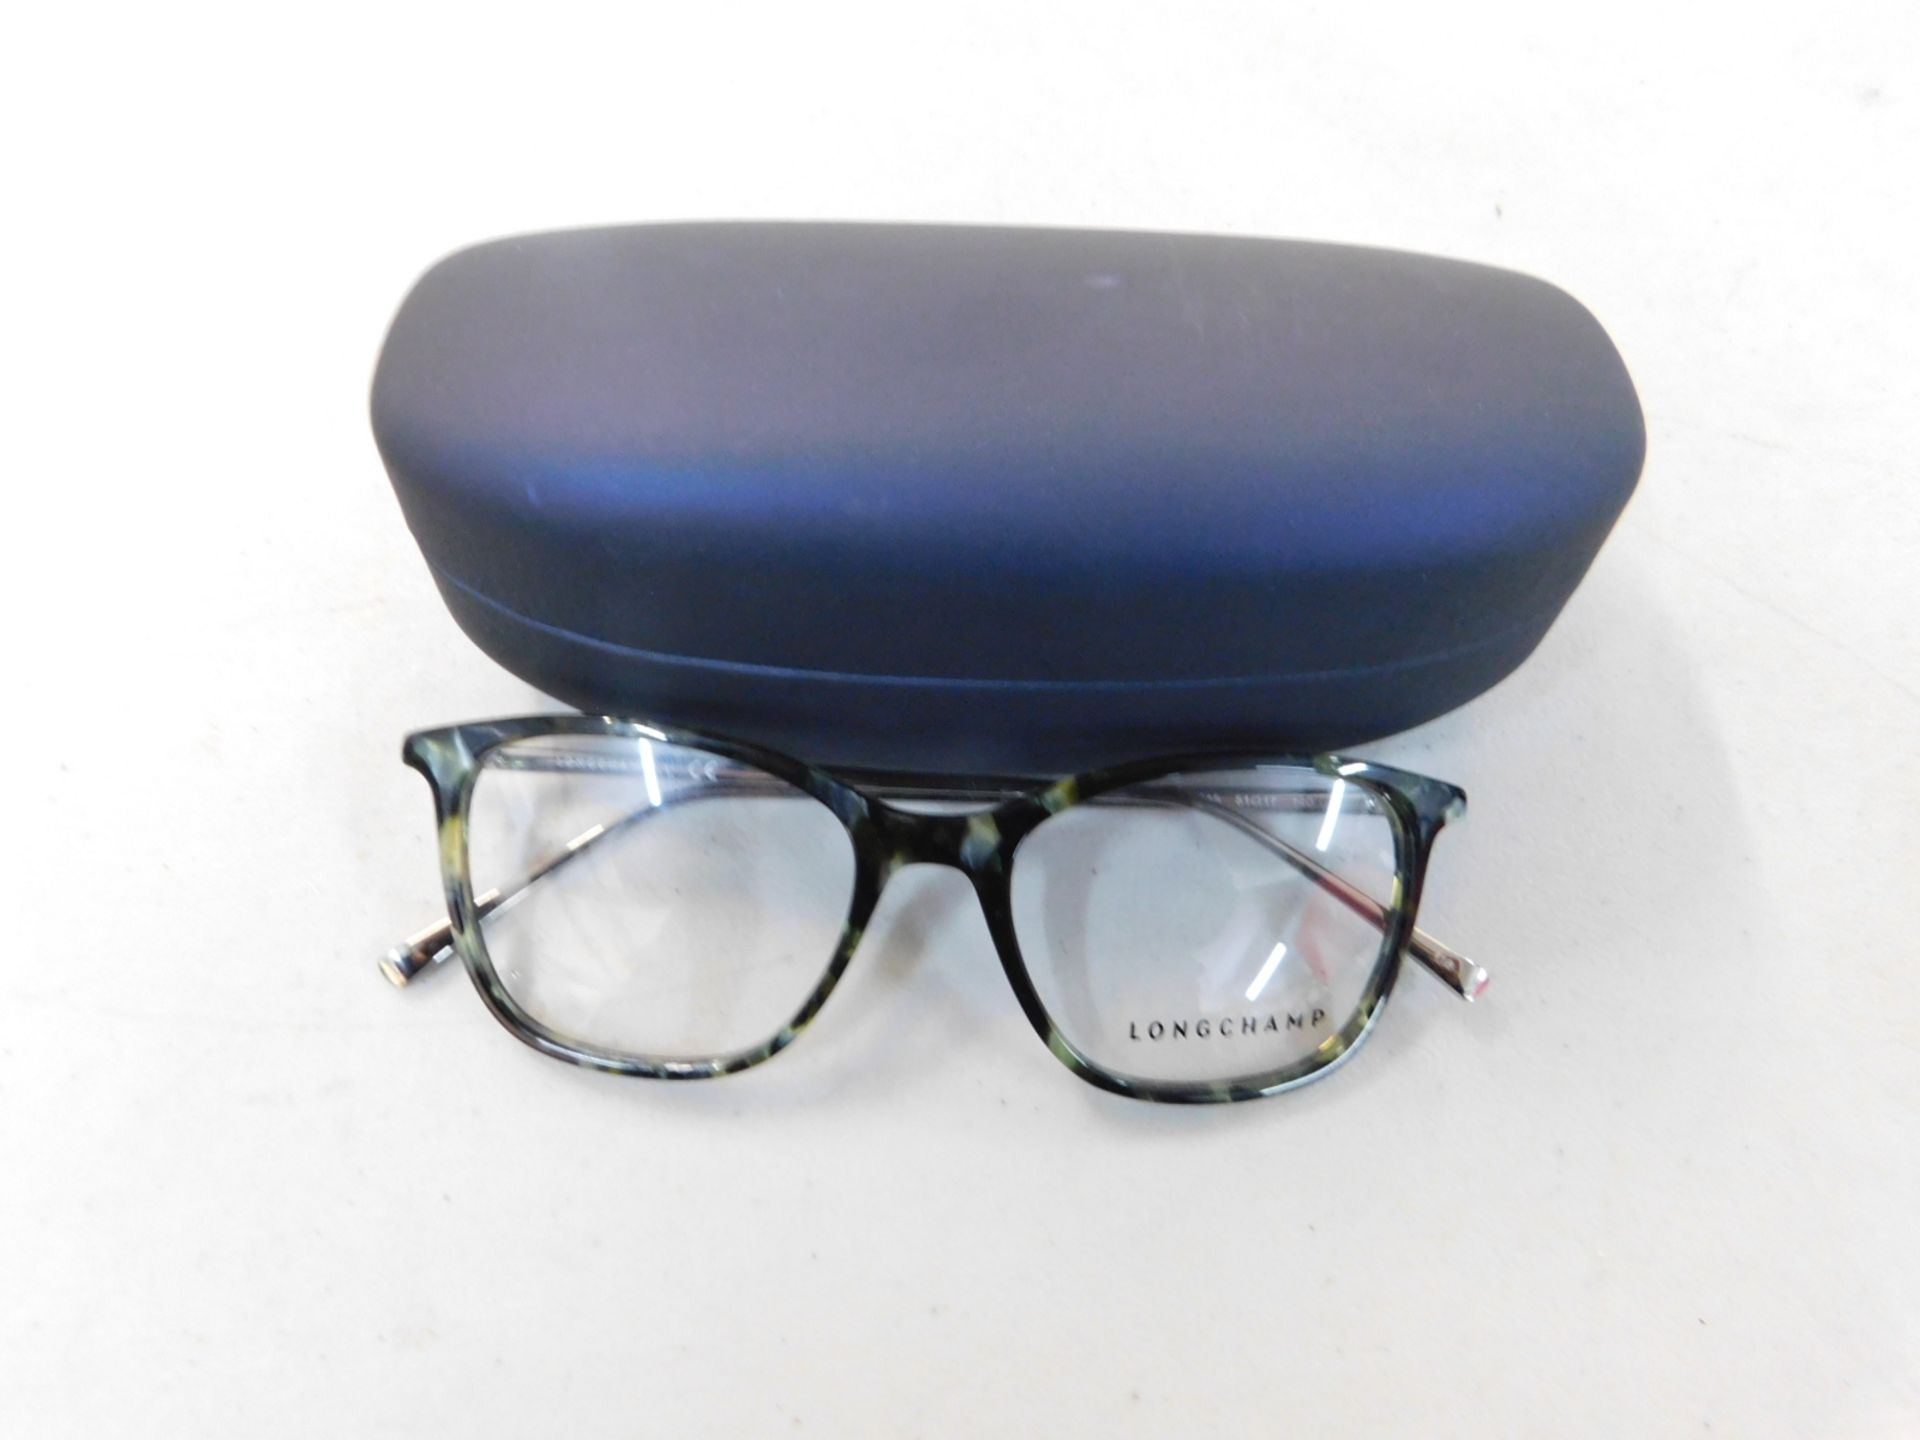 1 LONGCHAMP PAIR OF GLASSES FRAME WITH CASE MODEL LO2606 RRP Â£99.99